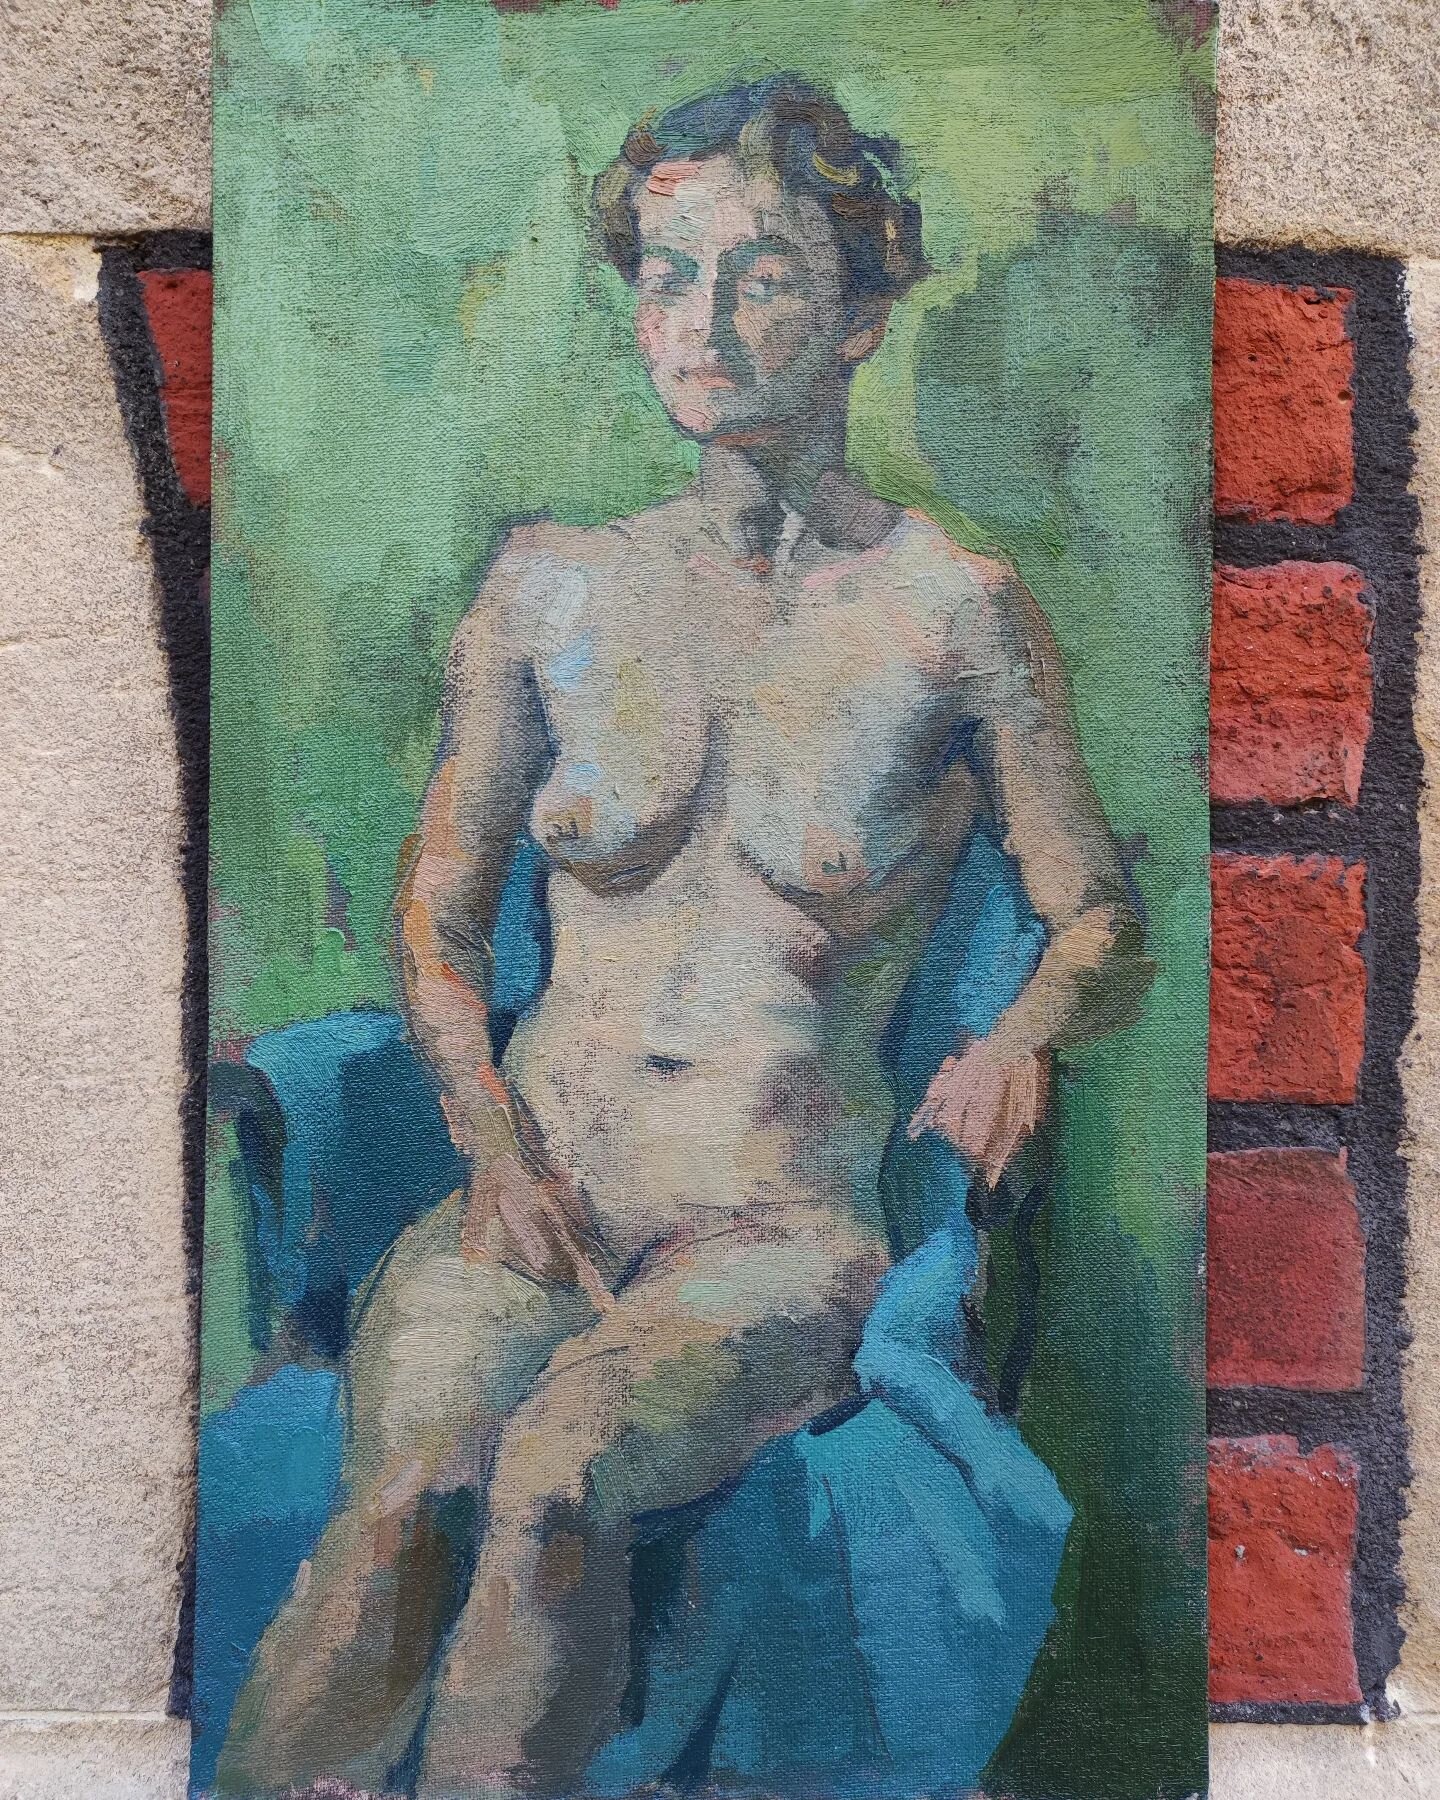 Long thin one of Kelly
Oil on heavy cotton duck on board
About 10 x 18 inches

Still in my Prussian blue phase.
@kelly_lifemodel during a memorable day's painting a few weeks ago with @chertseyartists in Sunbury. 

@nerissadeeks did a good one.
...
#